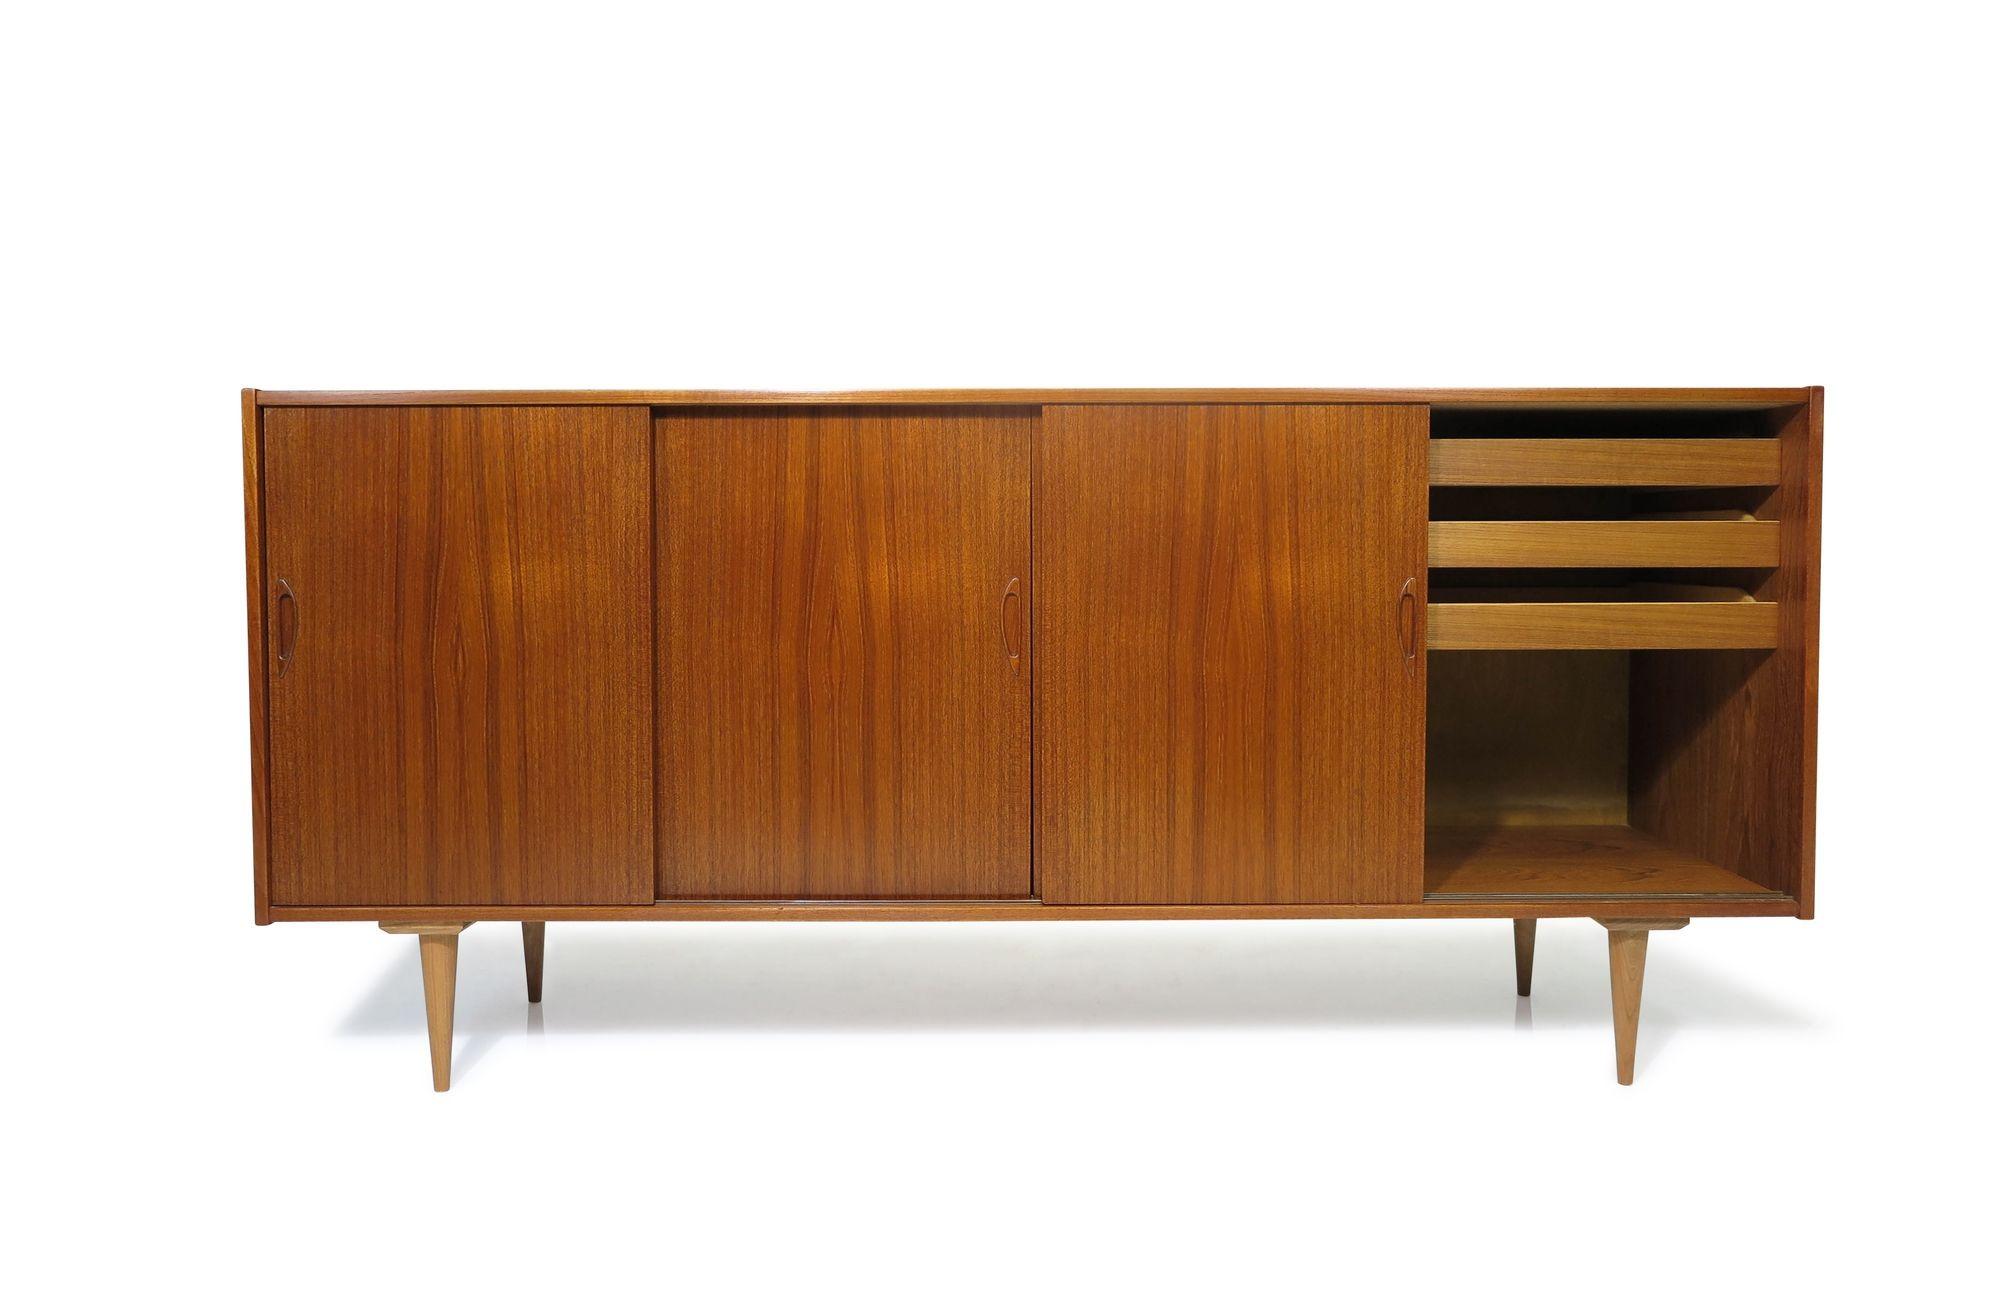 1960's Mid Century Danish Teak Credenza With Four Sliding Doors In Excellent Condition For Sale In Oakland, CA